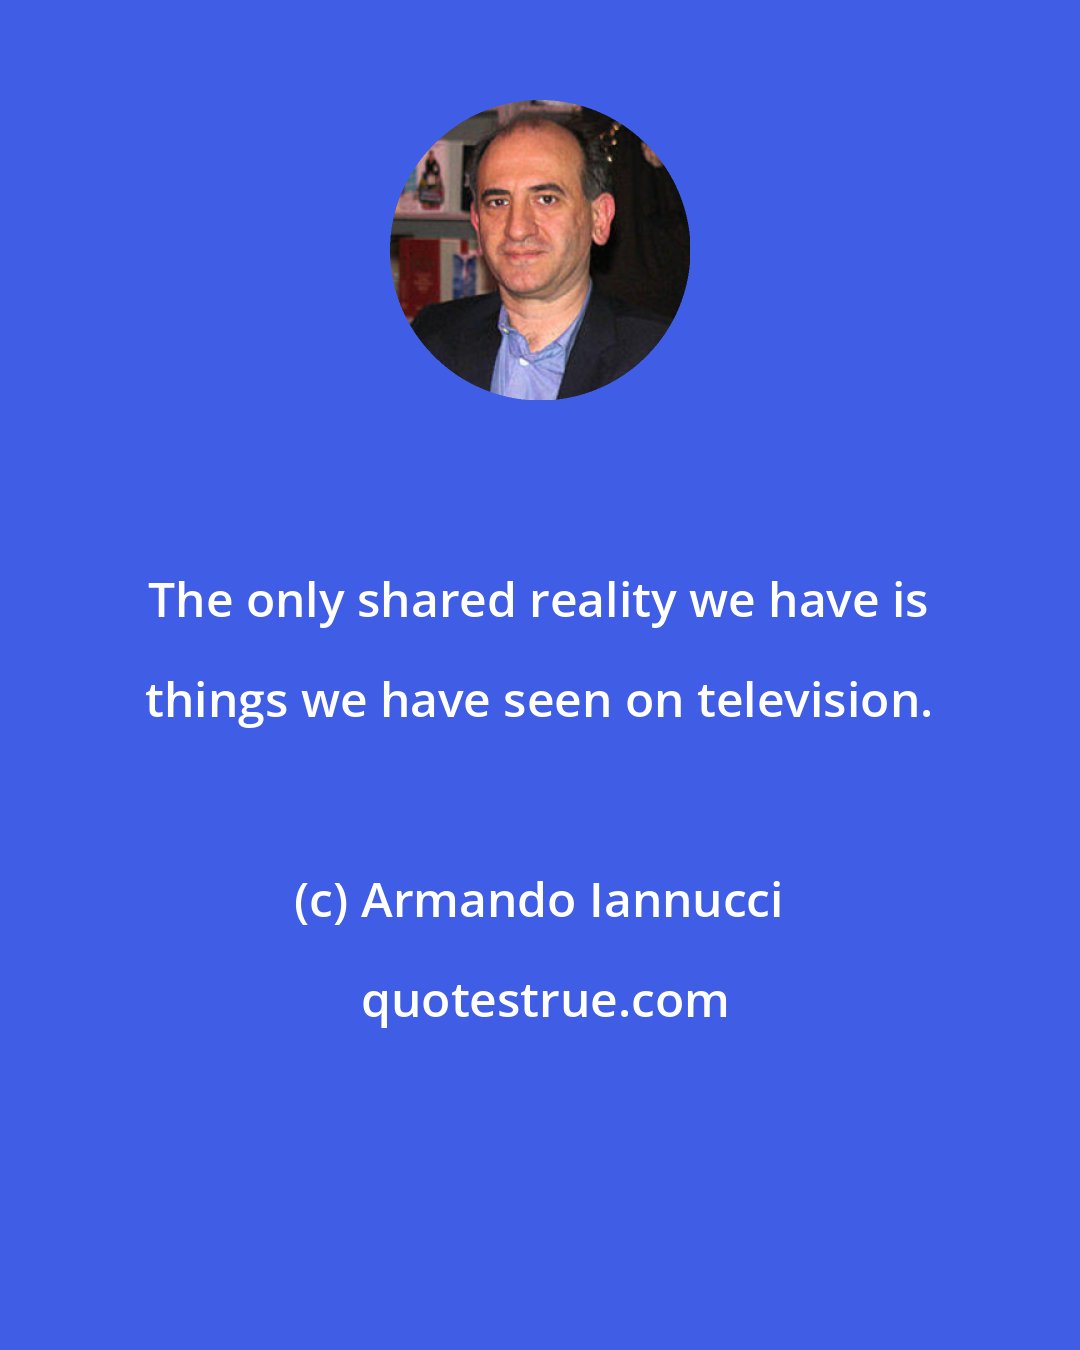 Armando Iannucci: The only shared reality we have is things we have seen on television.